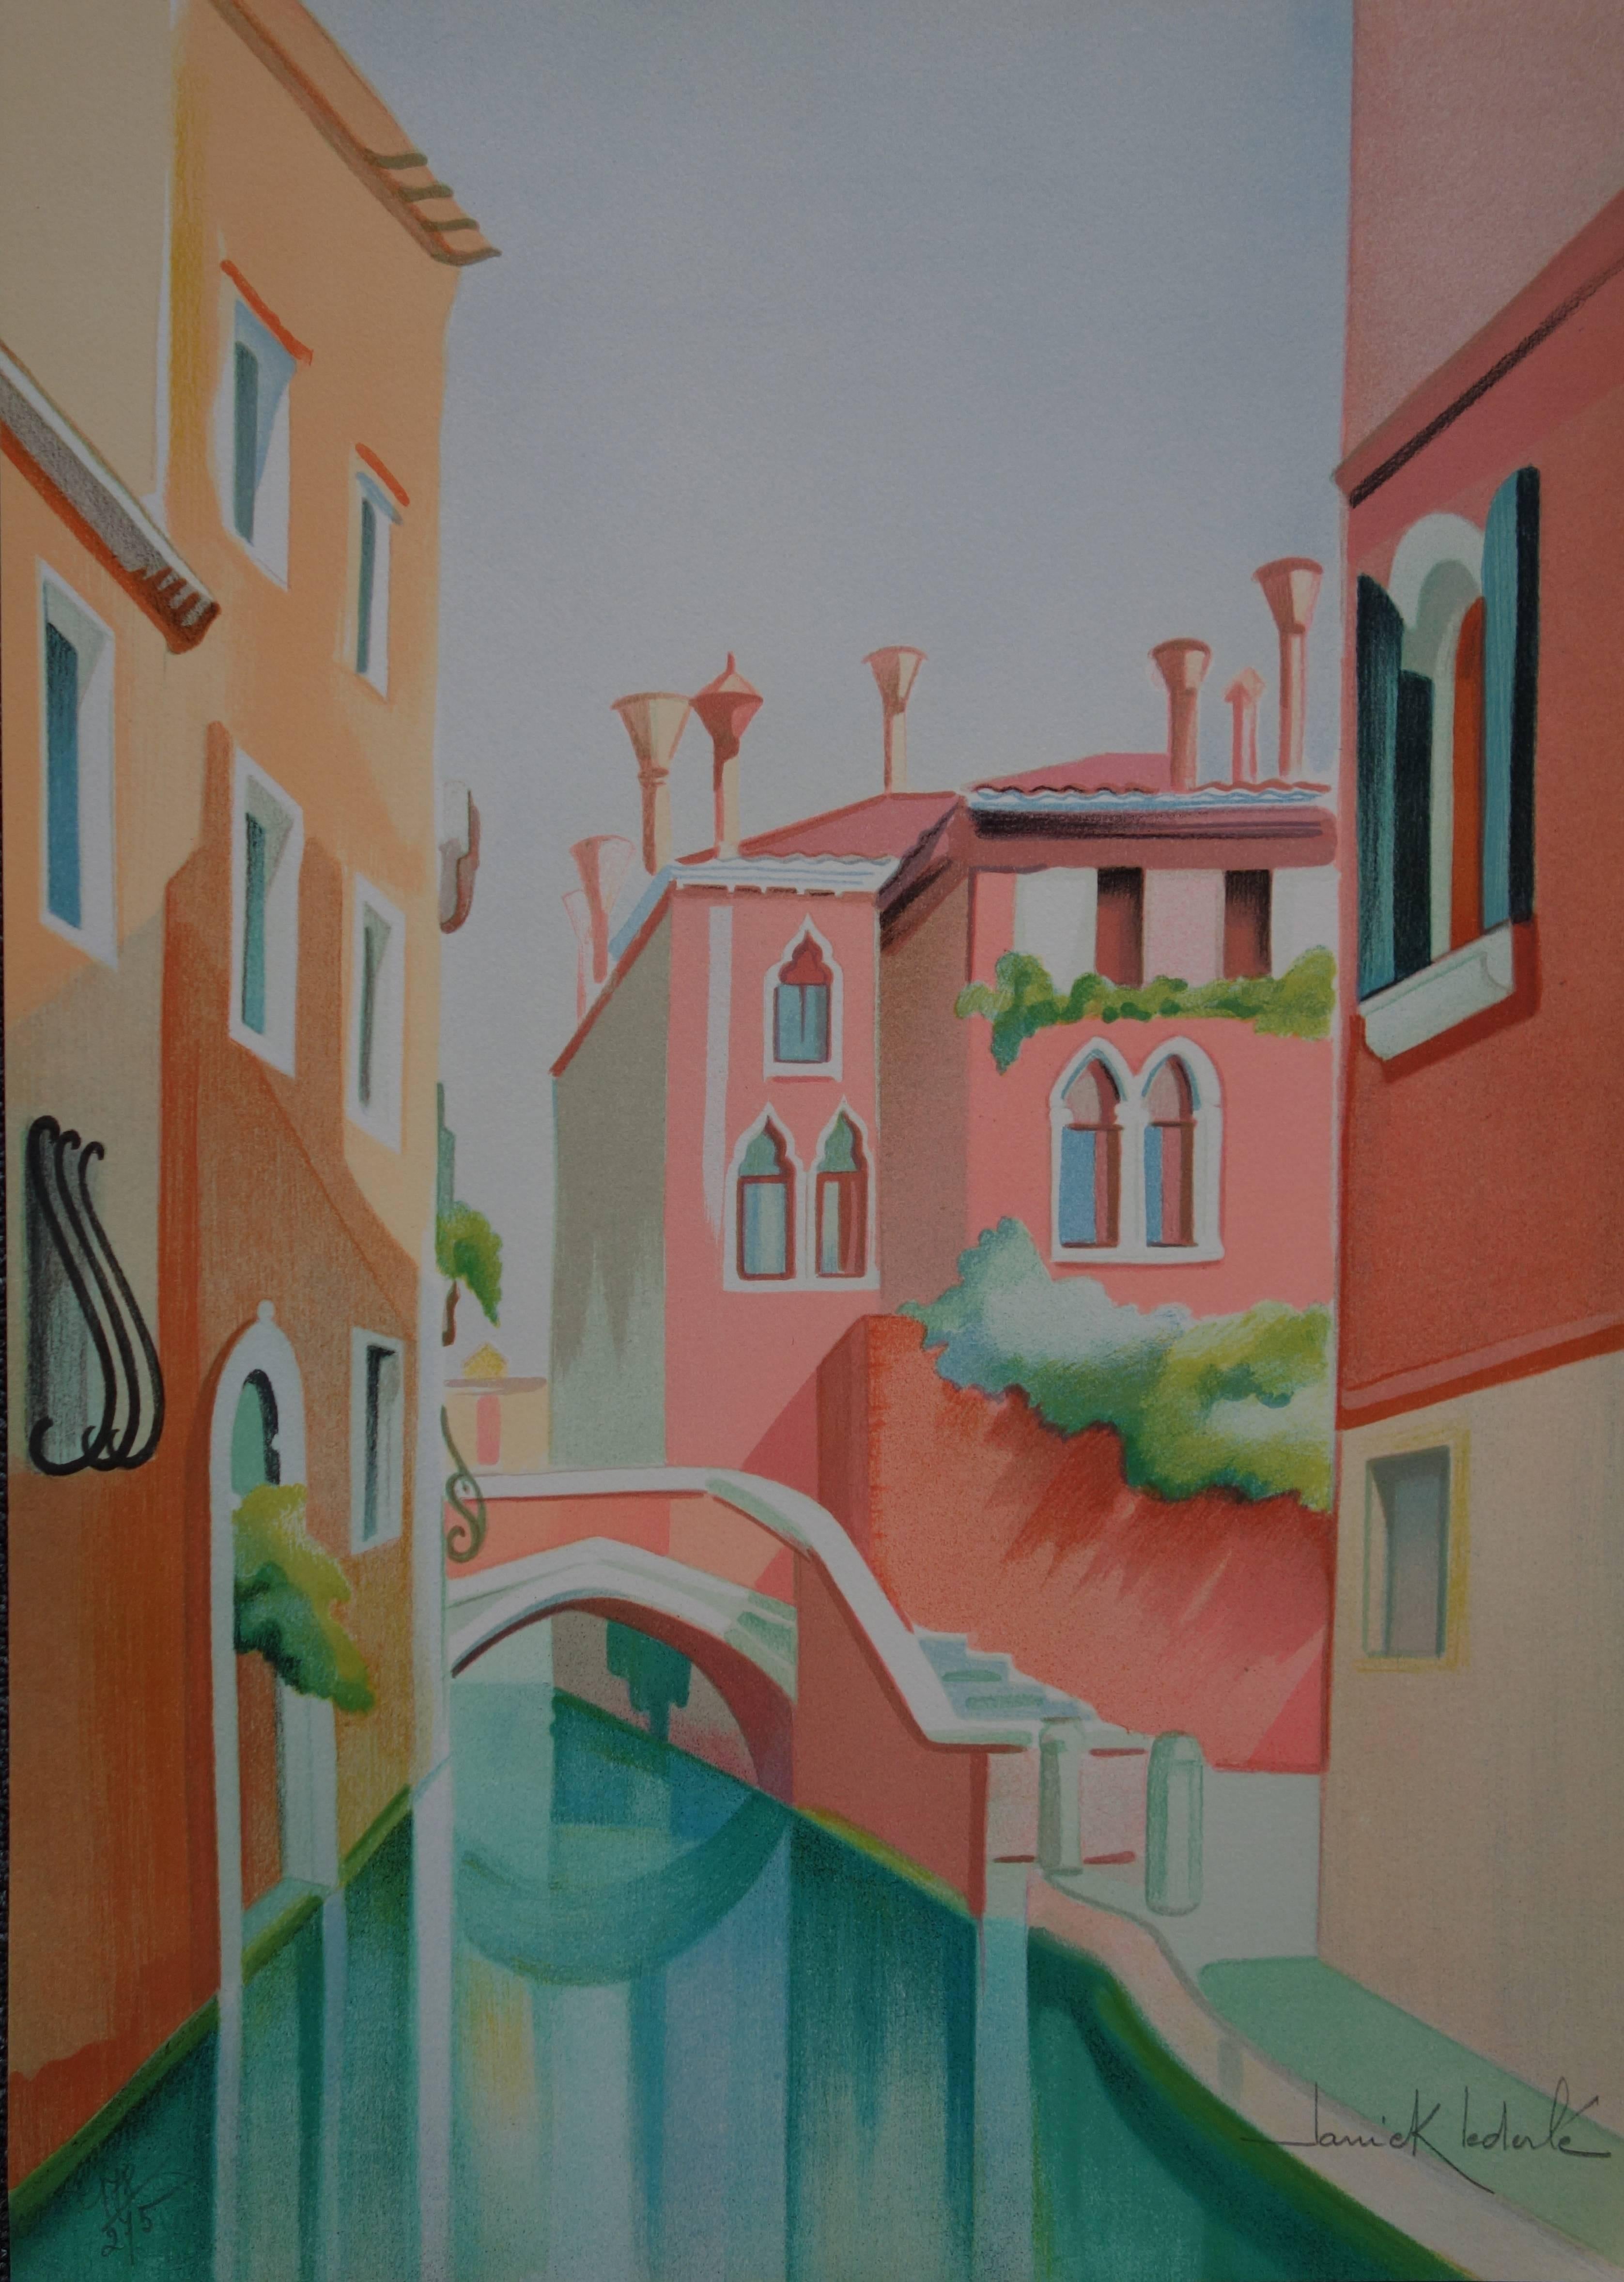 Quiet Canal in Venice - Original handsigned lithograph - 275ex